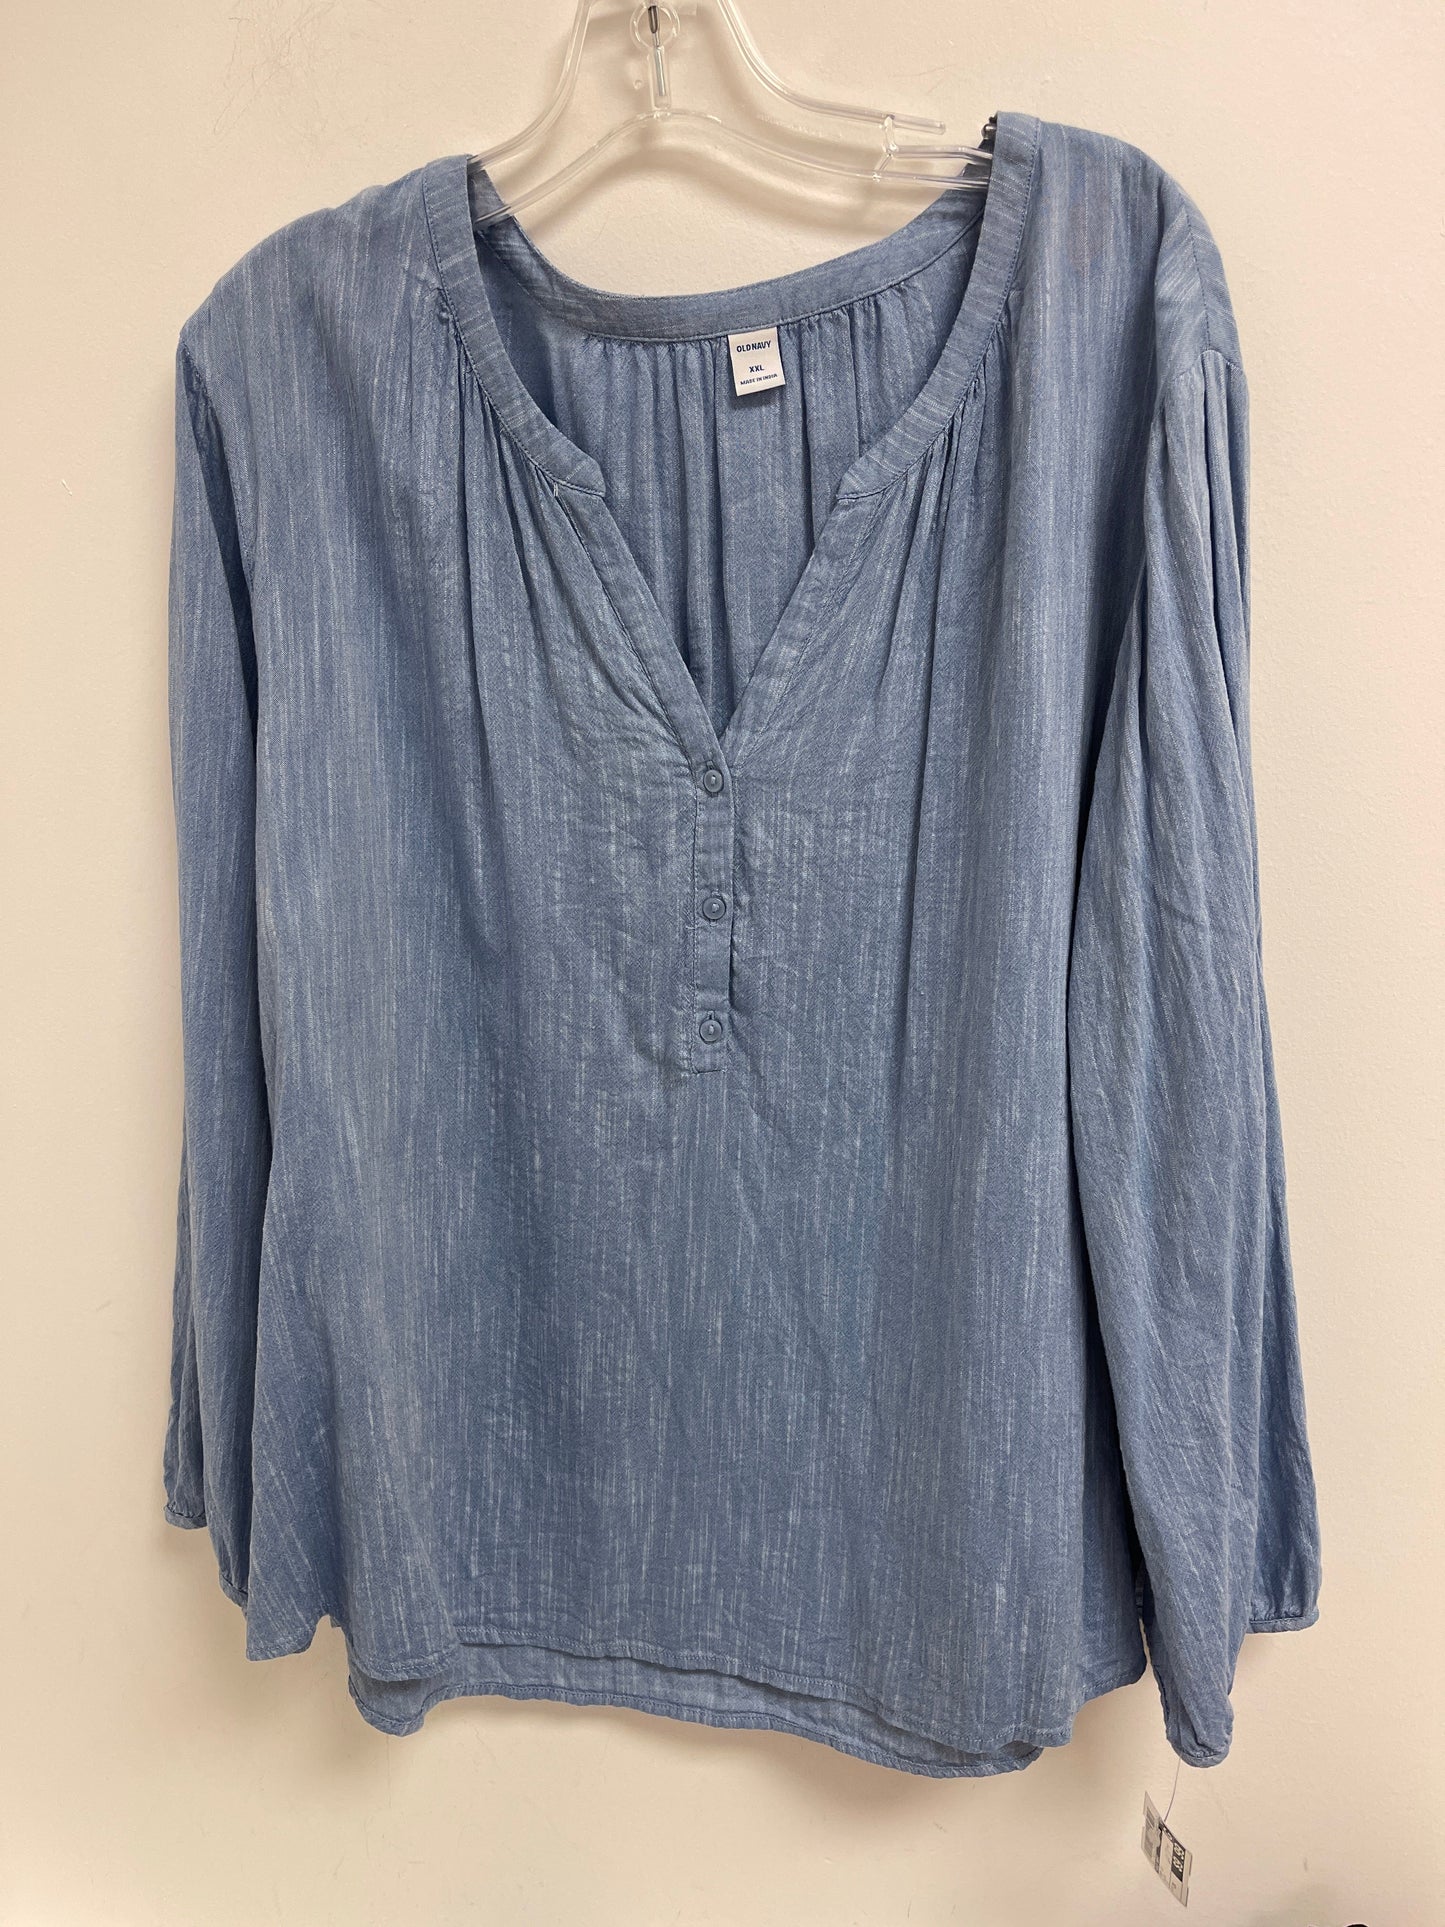 Blue Top Long Sleeve Old Navy, Size 2x